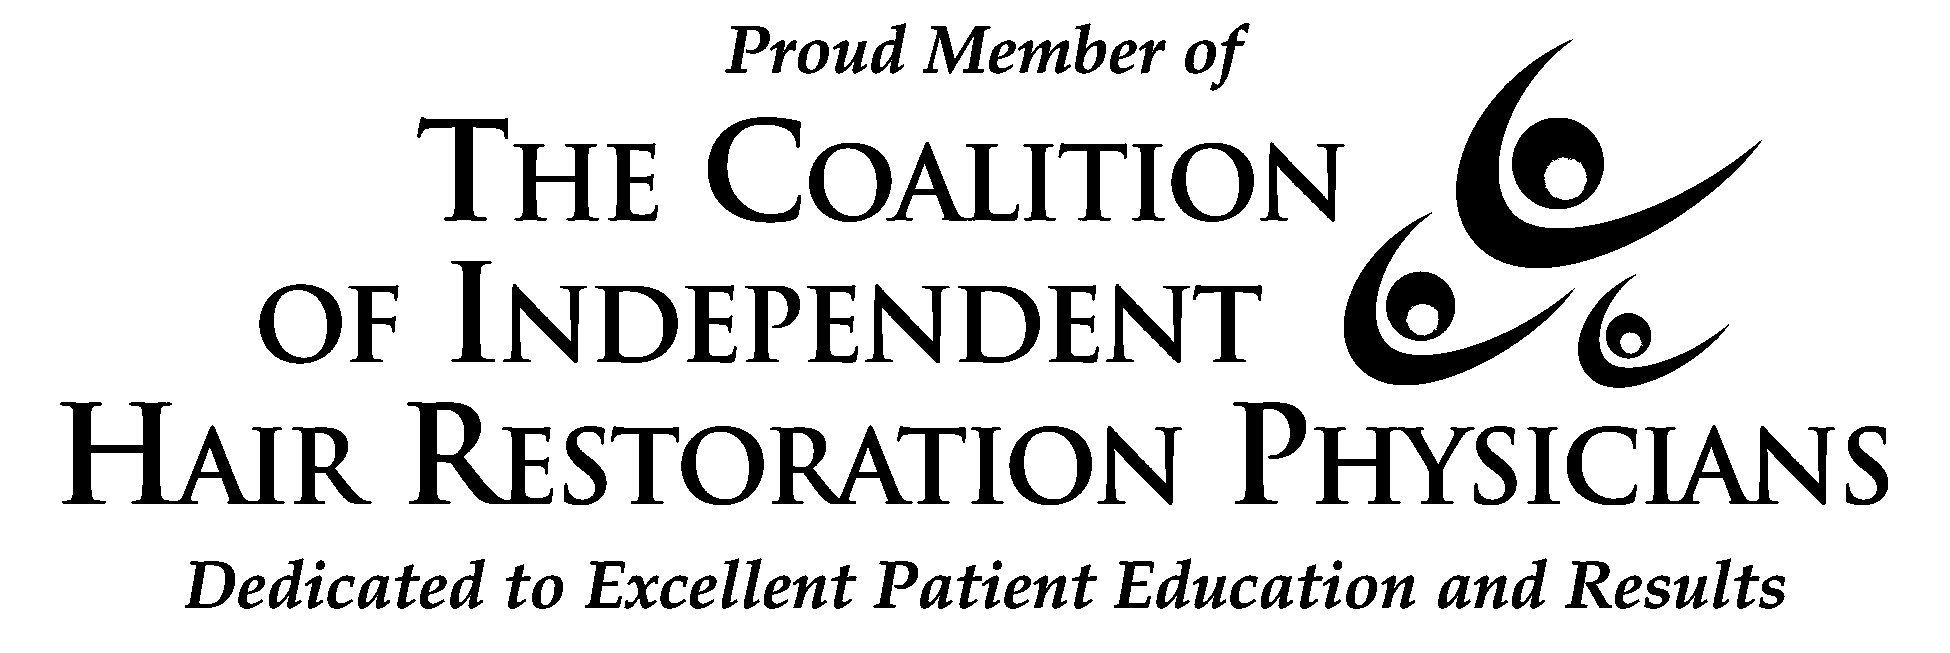 Coalition of Independent Hair Restoration Physicians